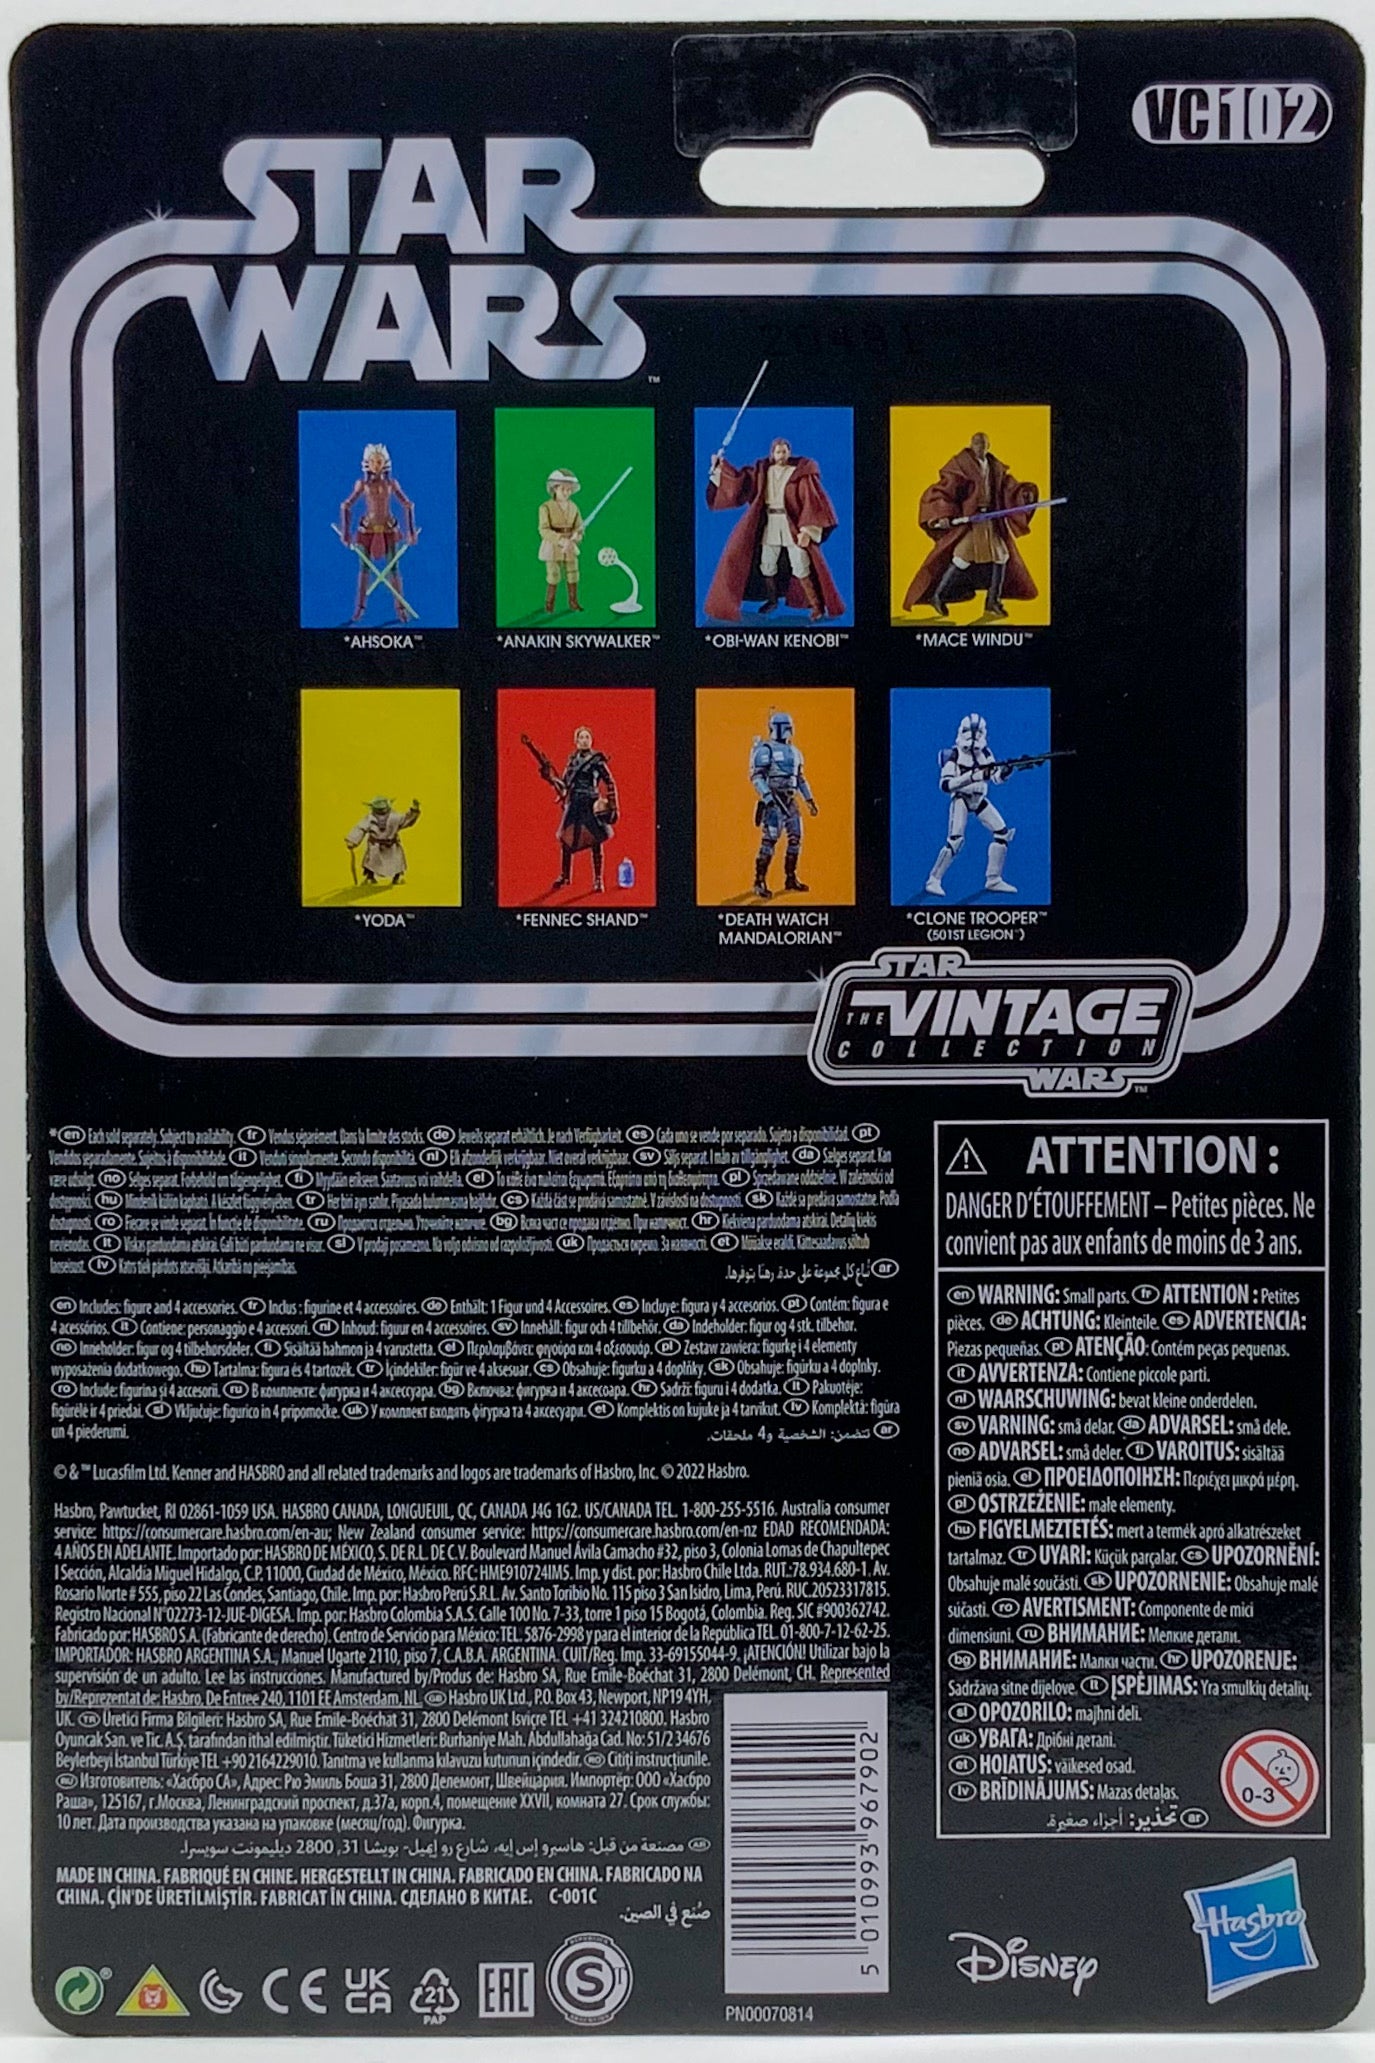 Buy Now at Tatoyshop.com Celebrate the legacy of Star Wars, the action-and-adventure-packed space saga from a galaxy far, far away, with premium 3.75-inch scale figures and vehicles from Star Wars The Vintage Collection. Figures feature premium detail and design across product and packaging inspired by the original line, as well as the entertainment-inspired collector grade deco that fans have come to know and love.